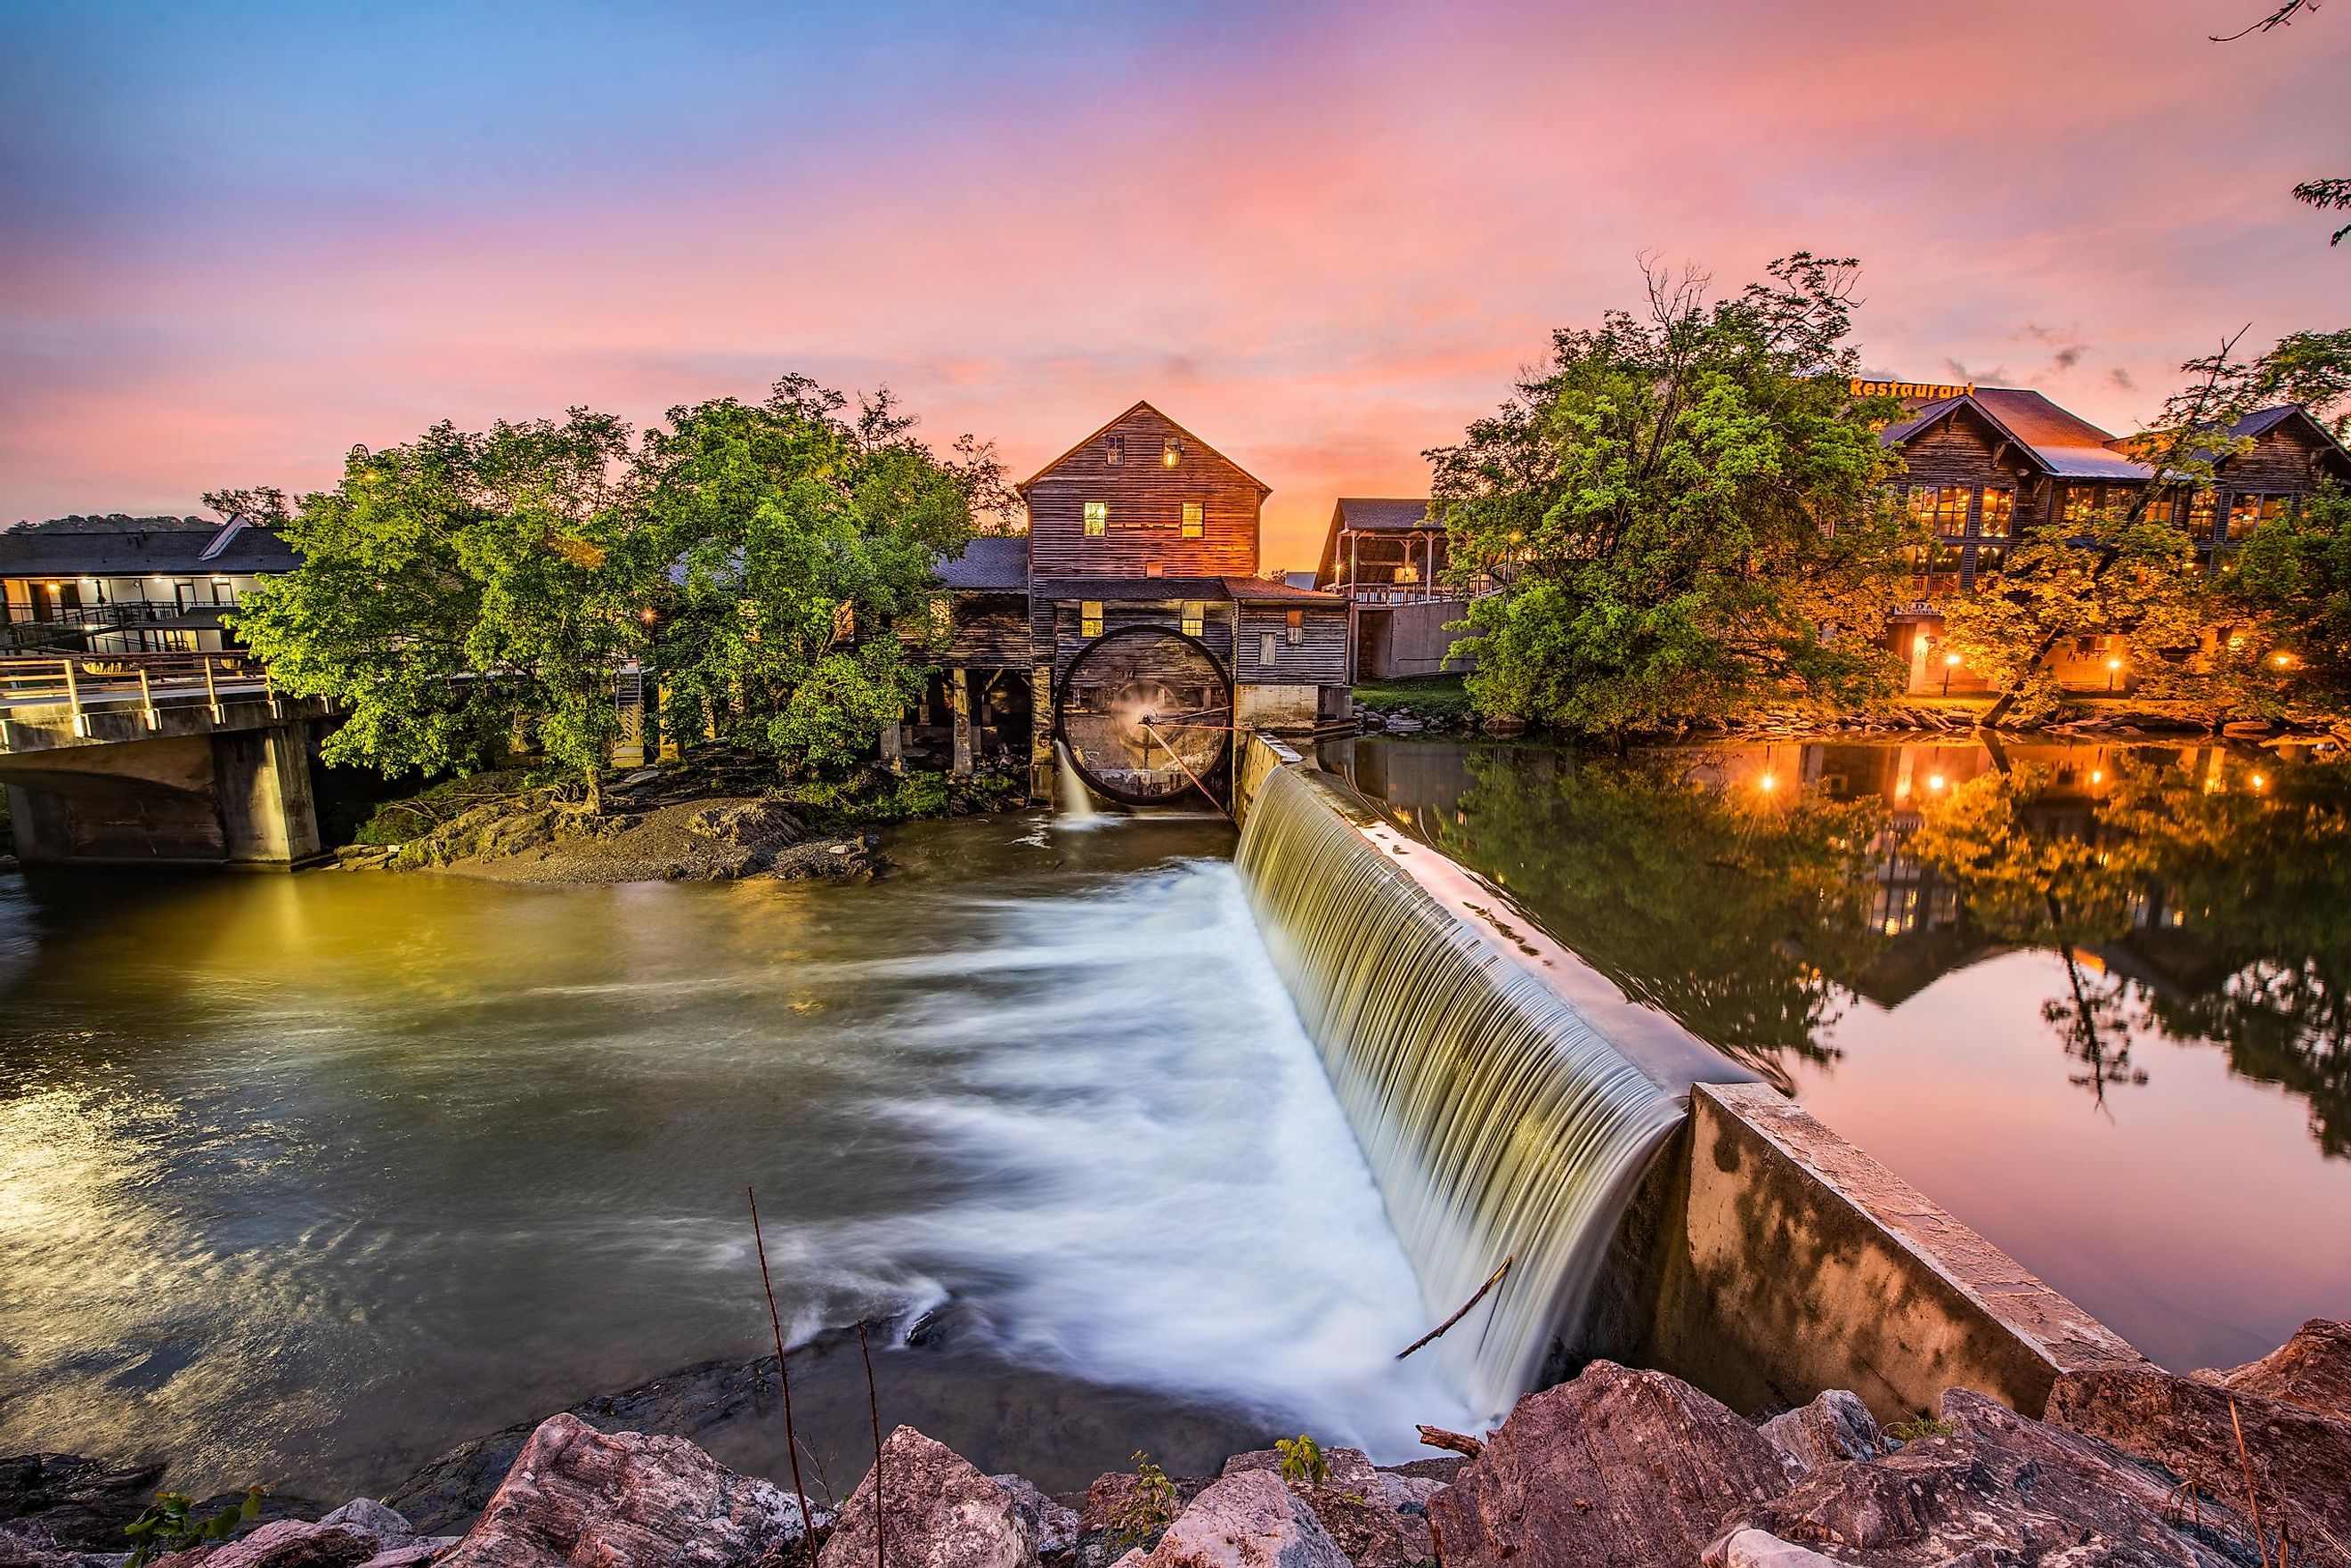 Old Mill at sunrise in Pigeon Forge, Tennessee.